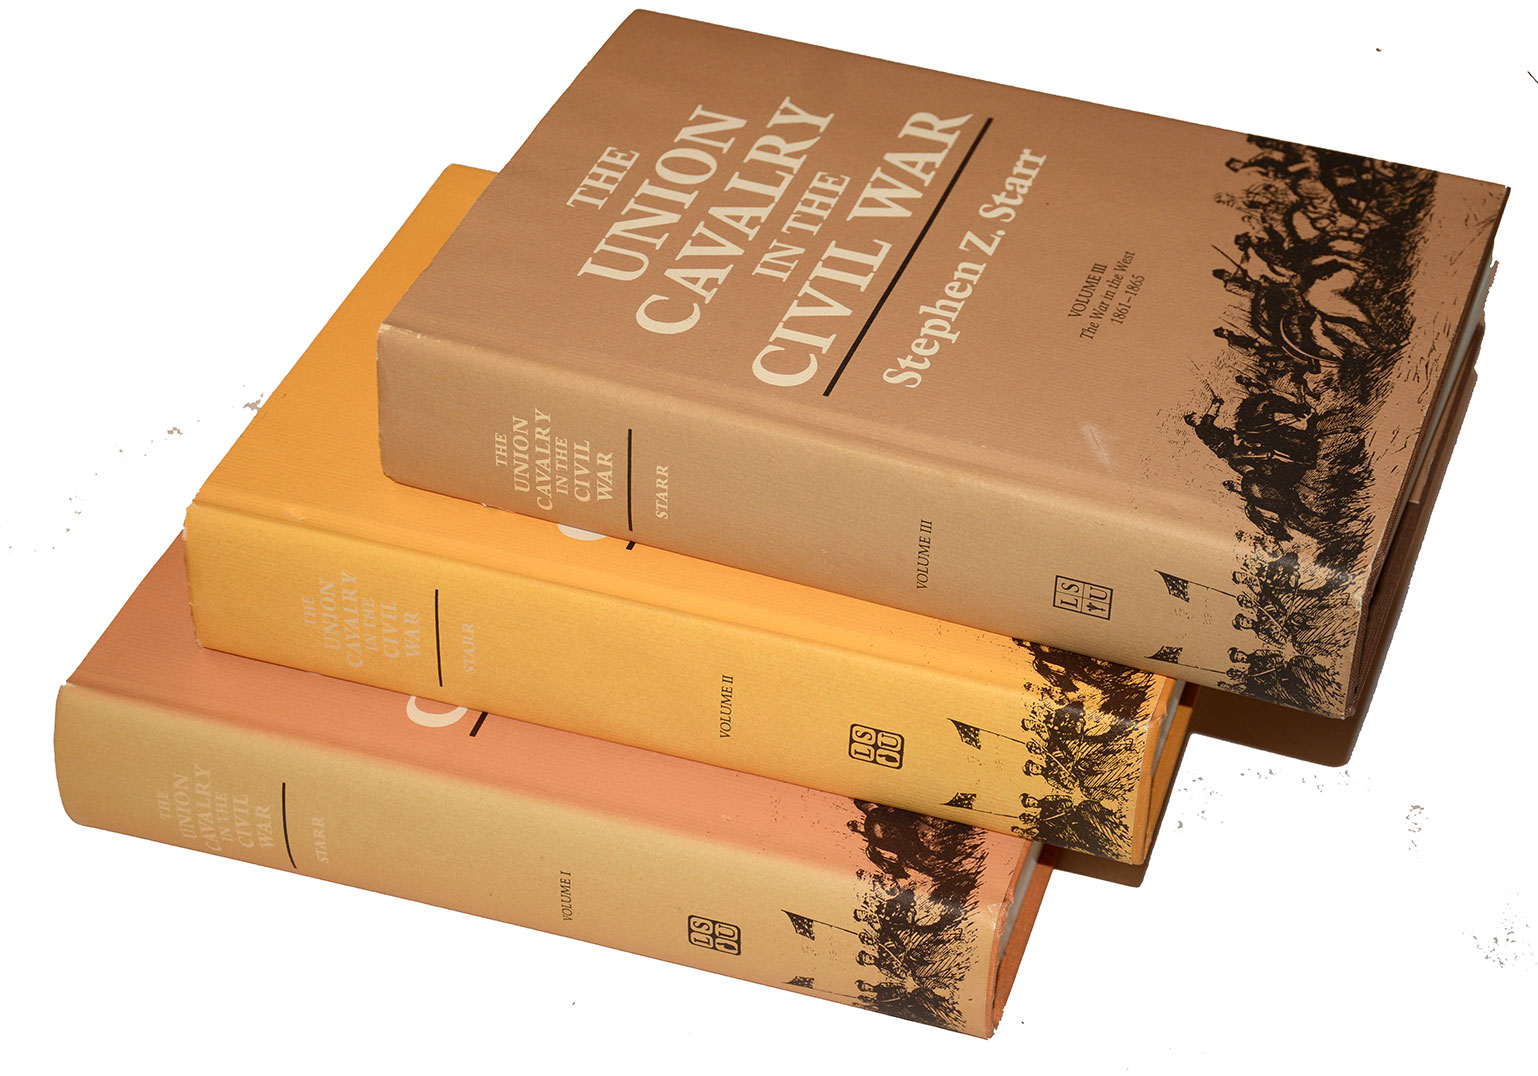 THREE VOLUME STUDY TITLED “THE UNION CAVALRY IN THE CIVIL WAR”